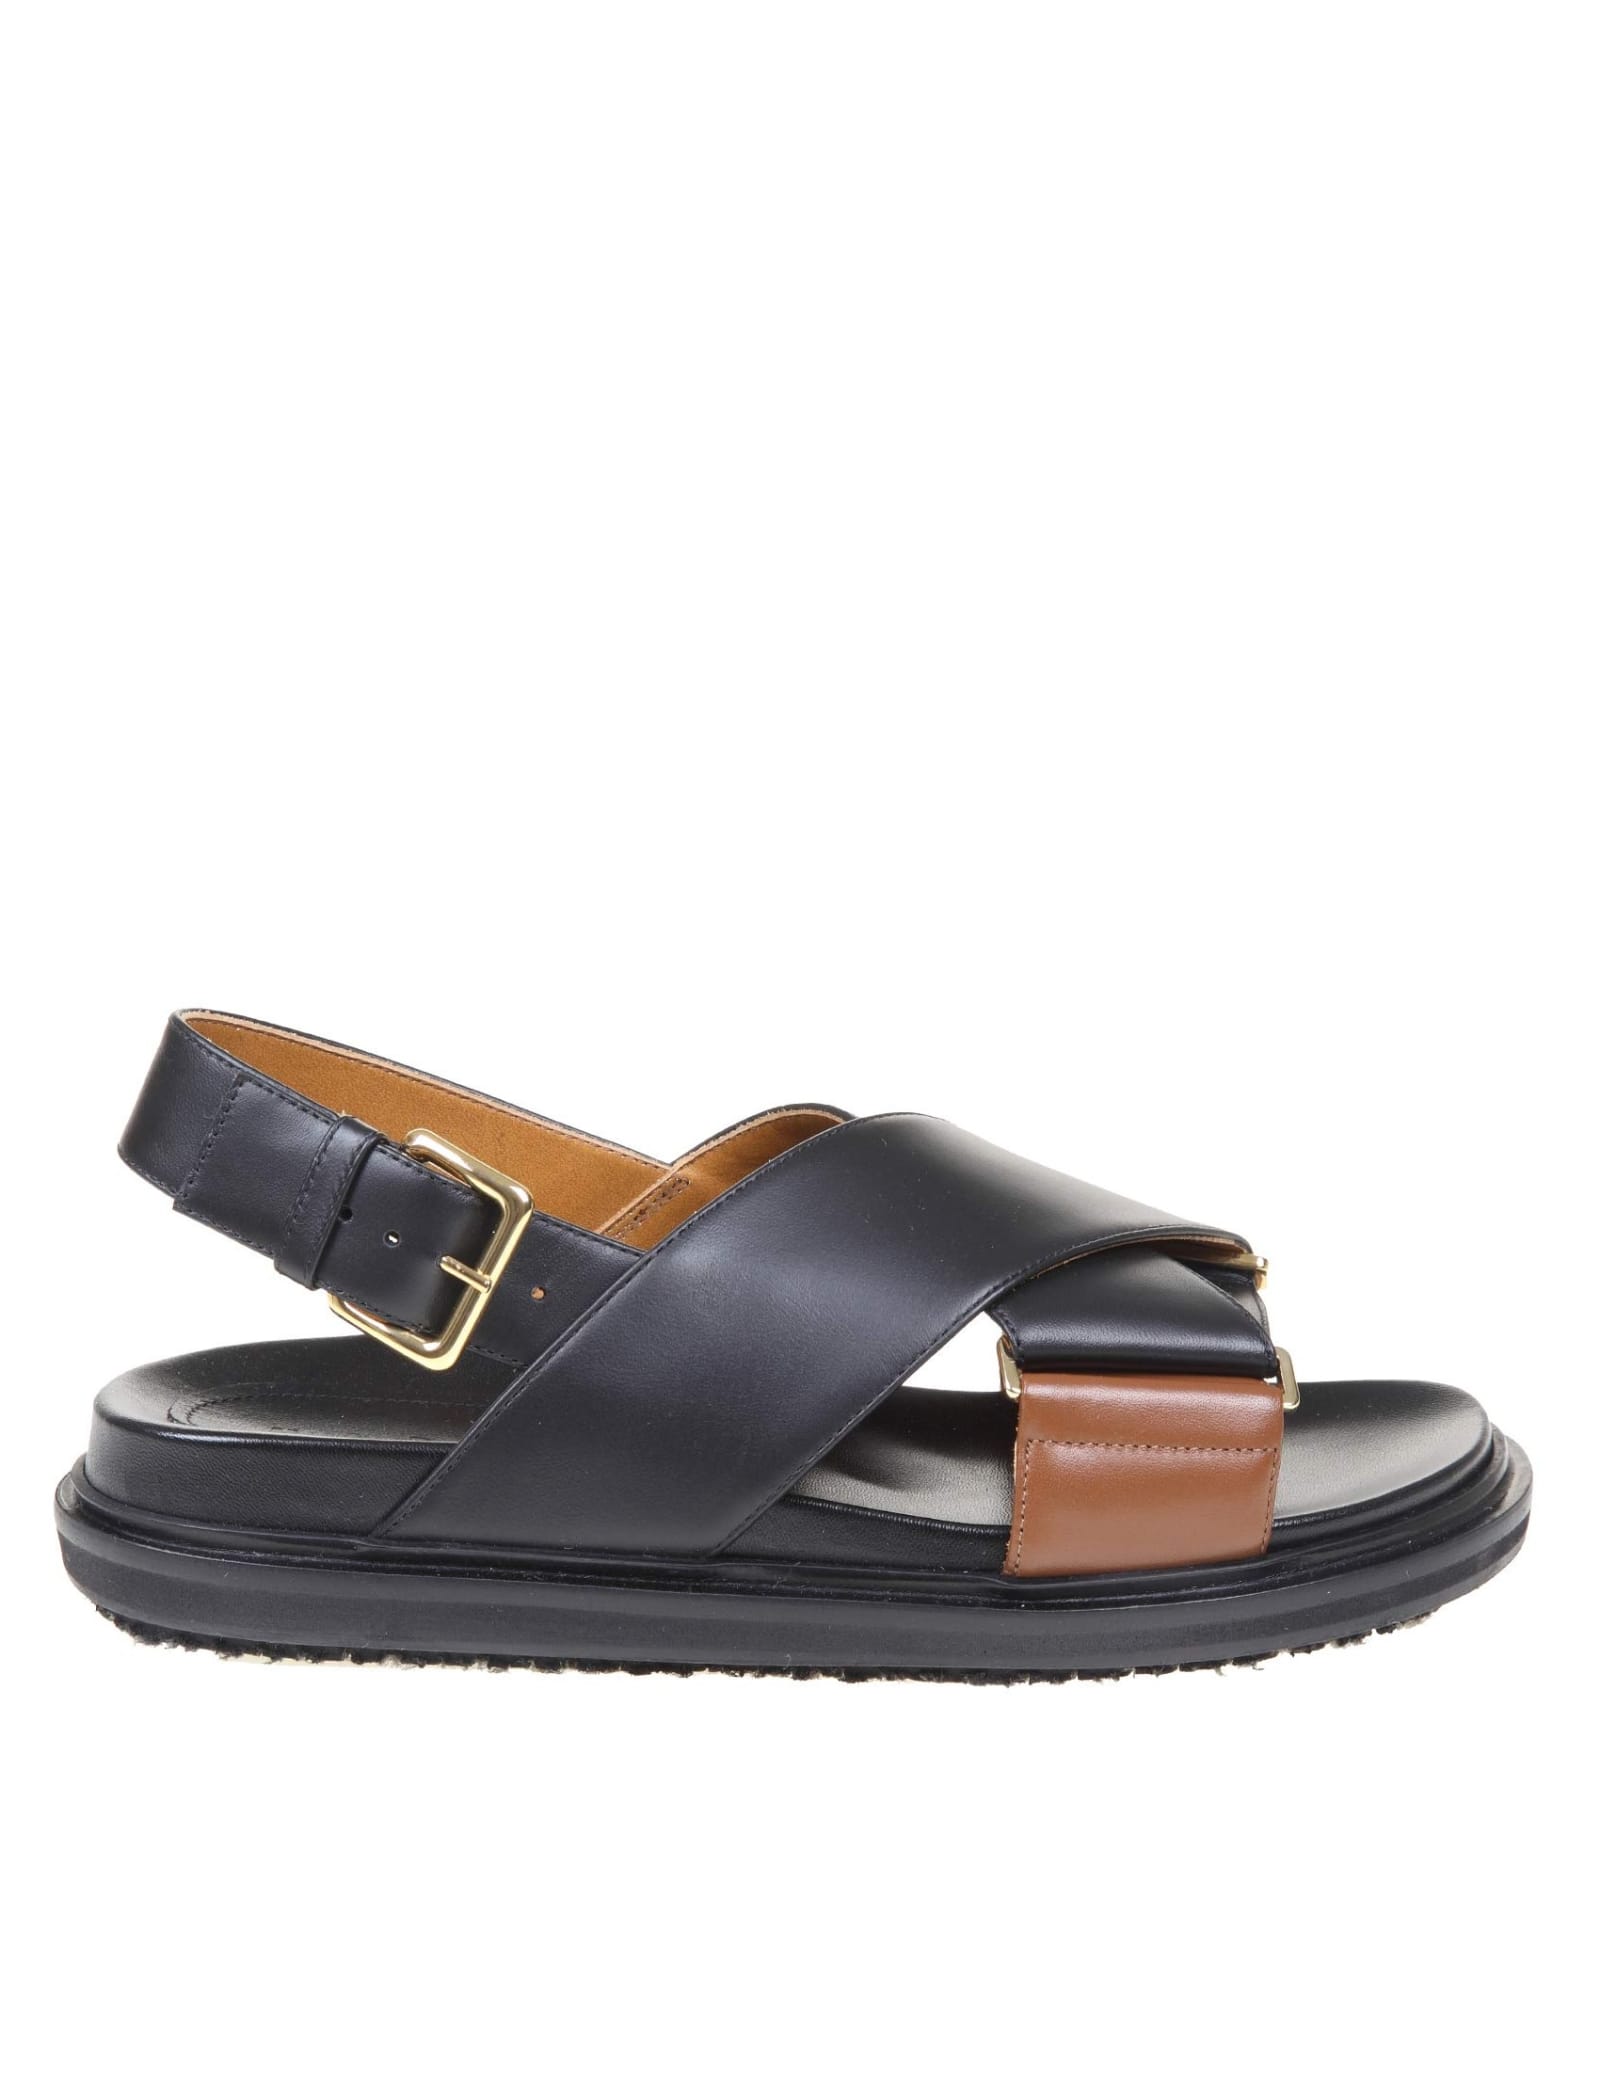 Buy Marni Fussbett Sandal In Black / Brown Leather online, shop Marni shoes with free shipping